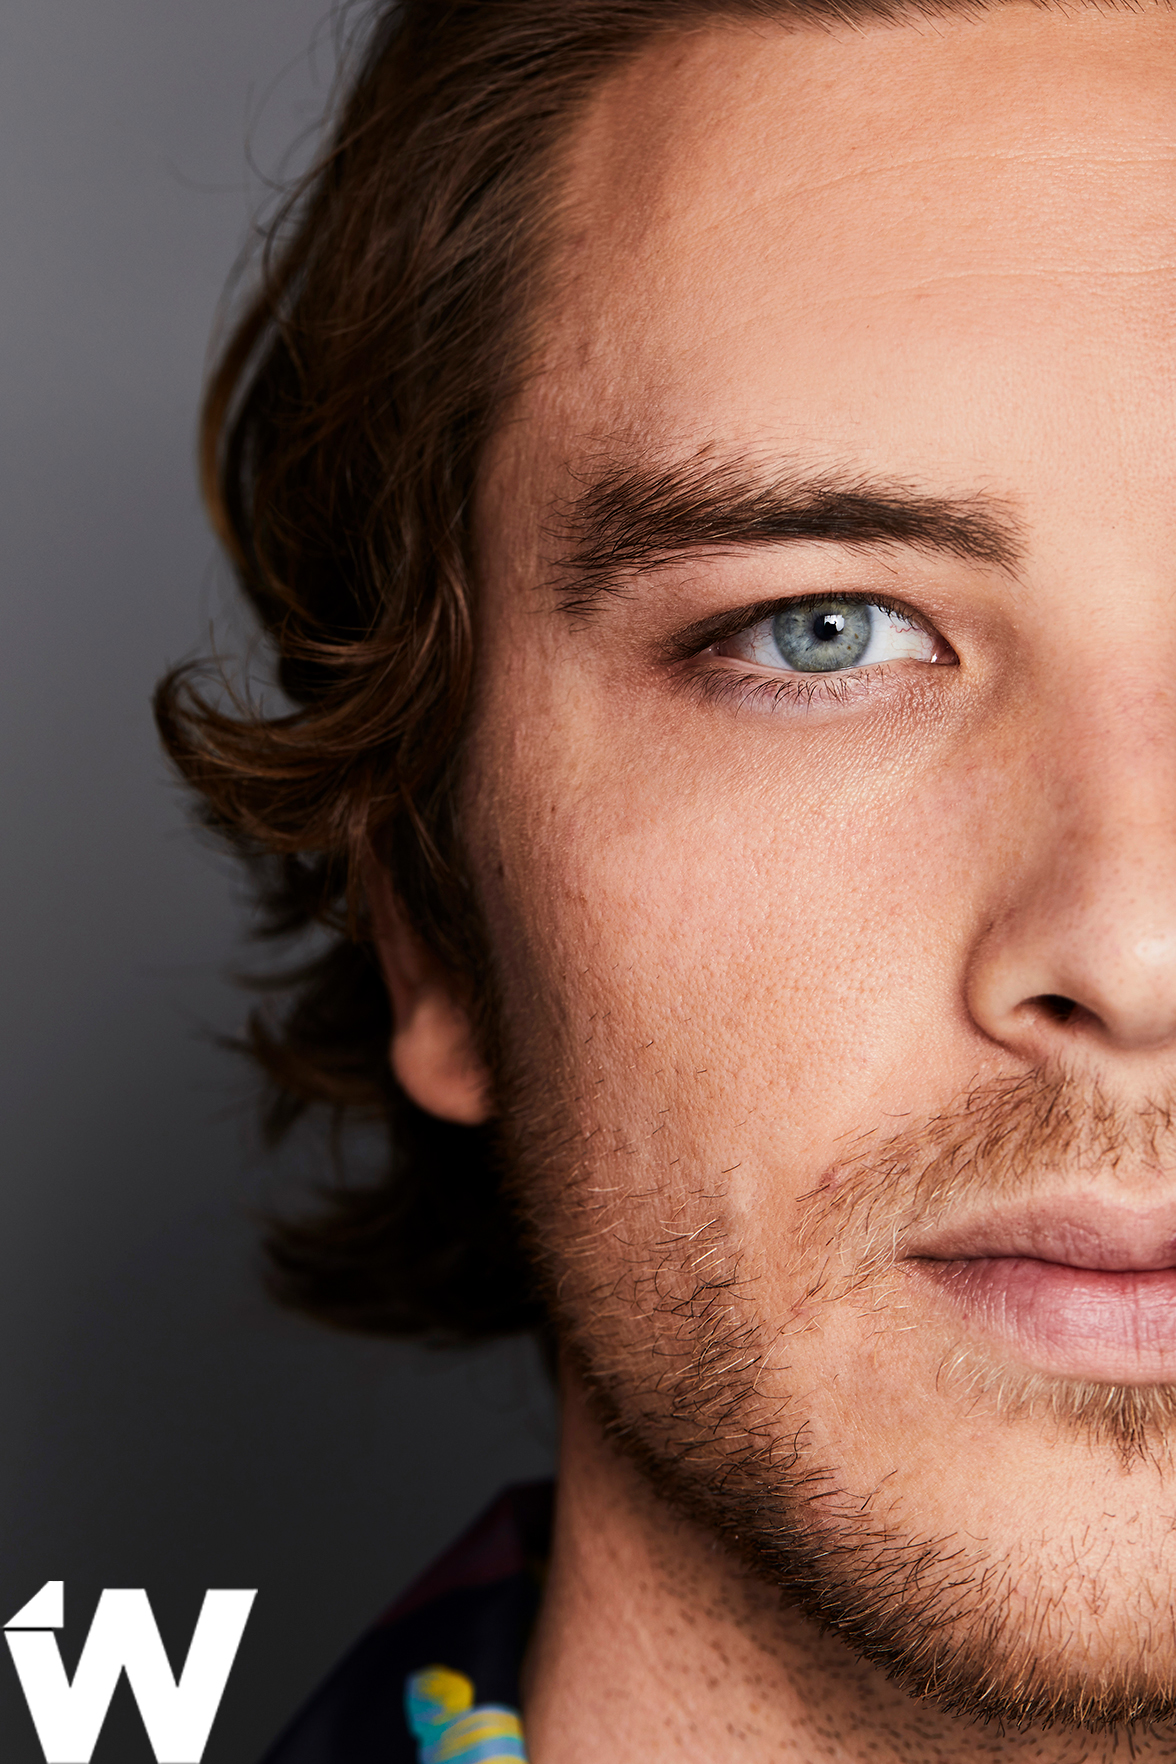 Cody Fern Archives - The Last Fashion Bible